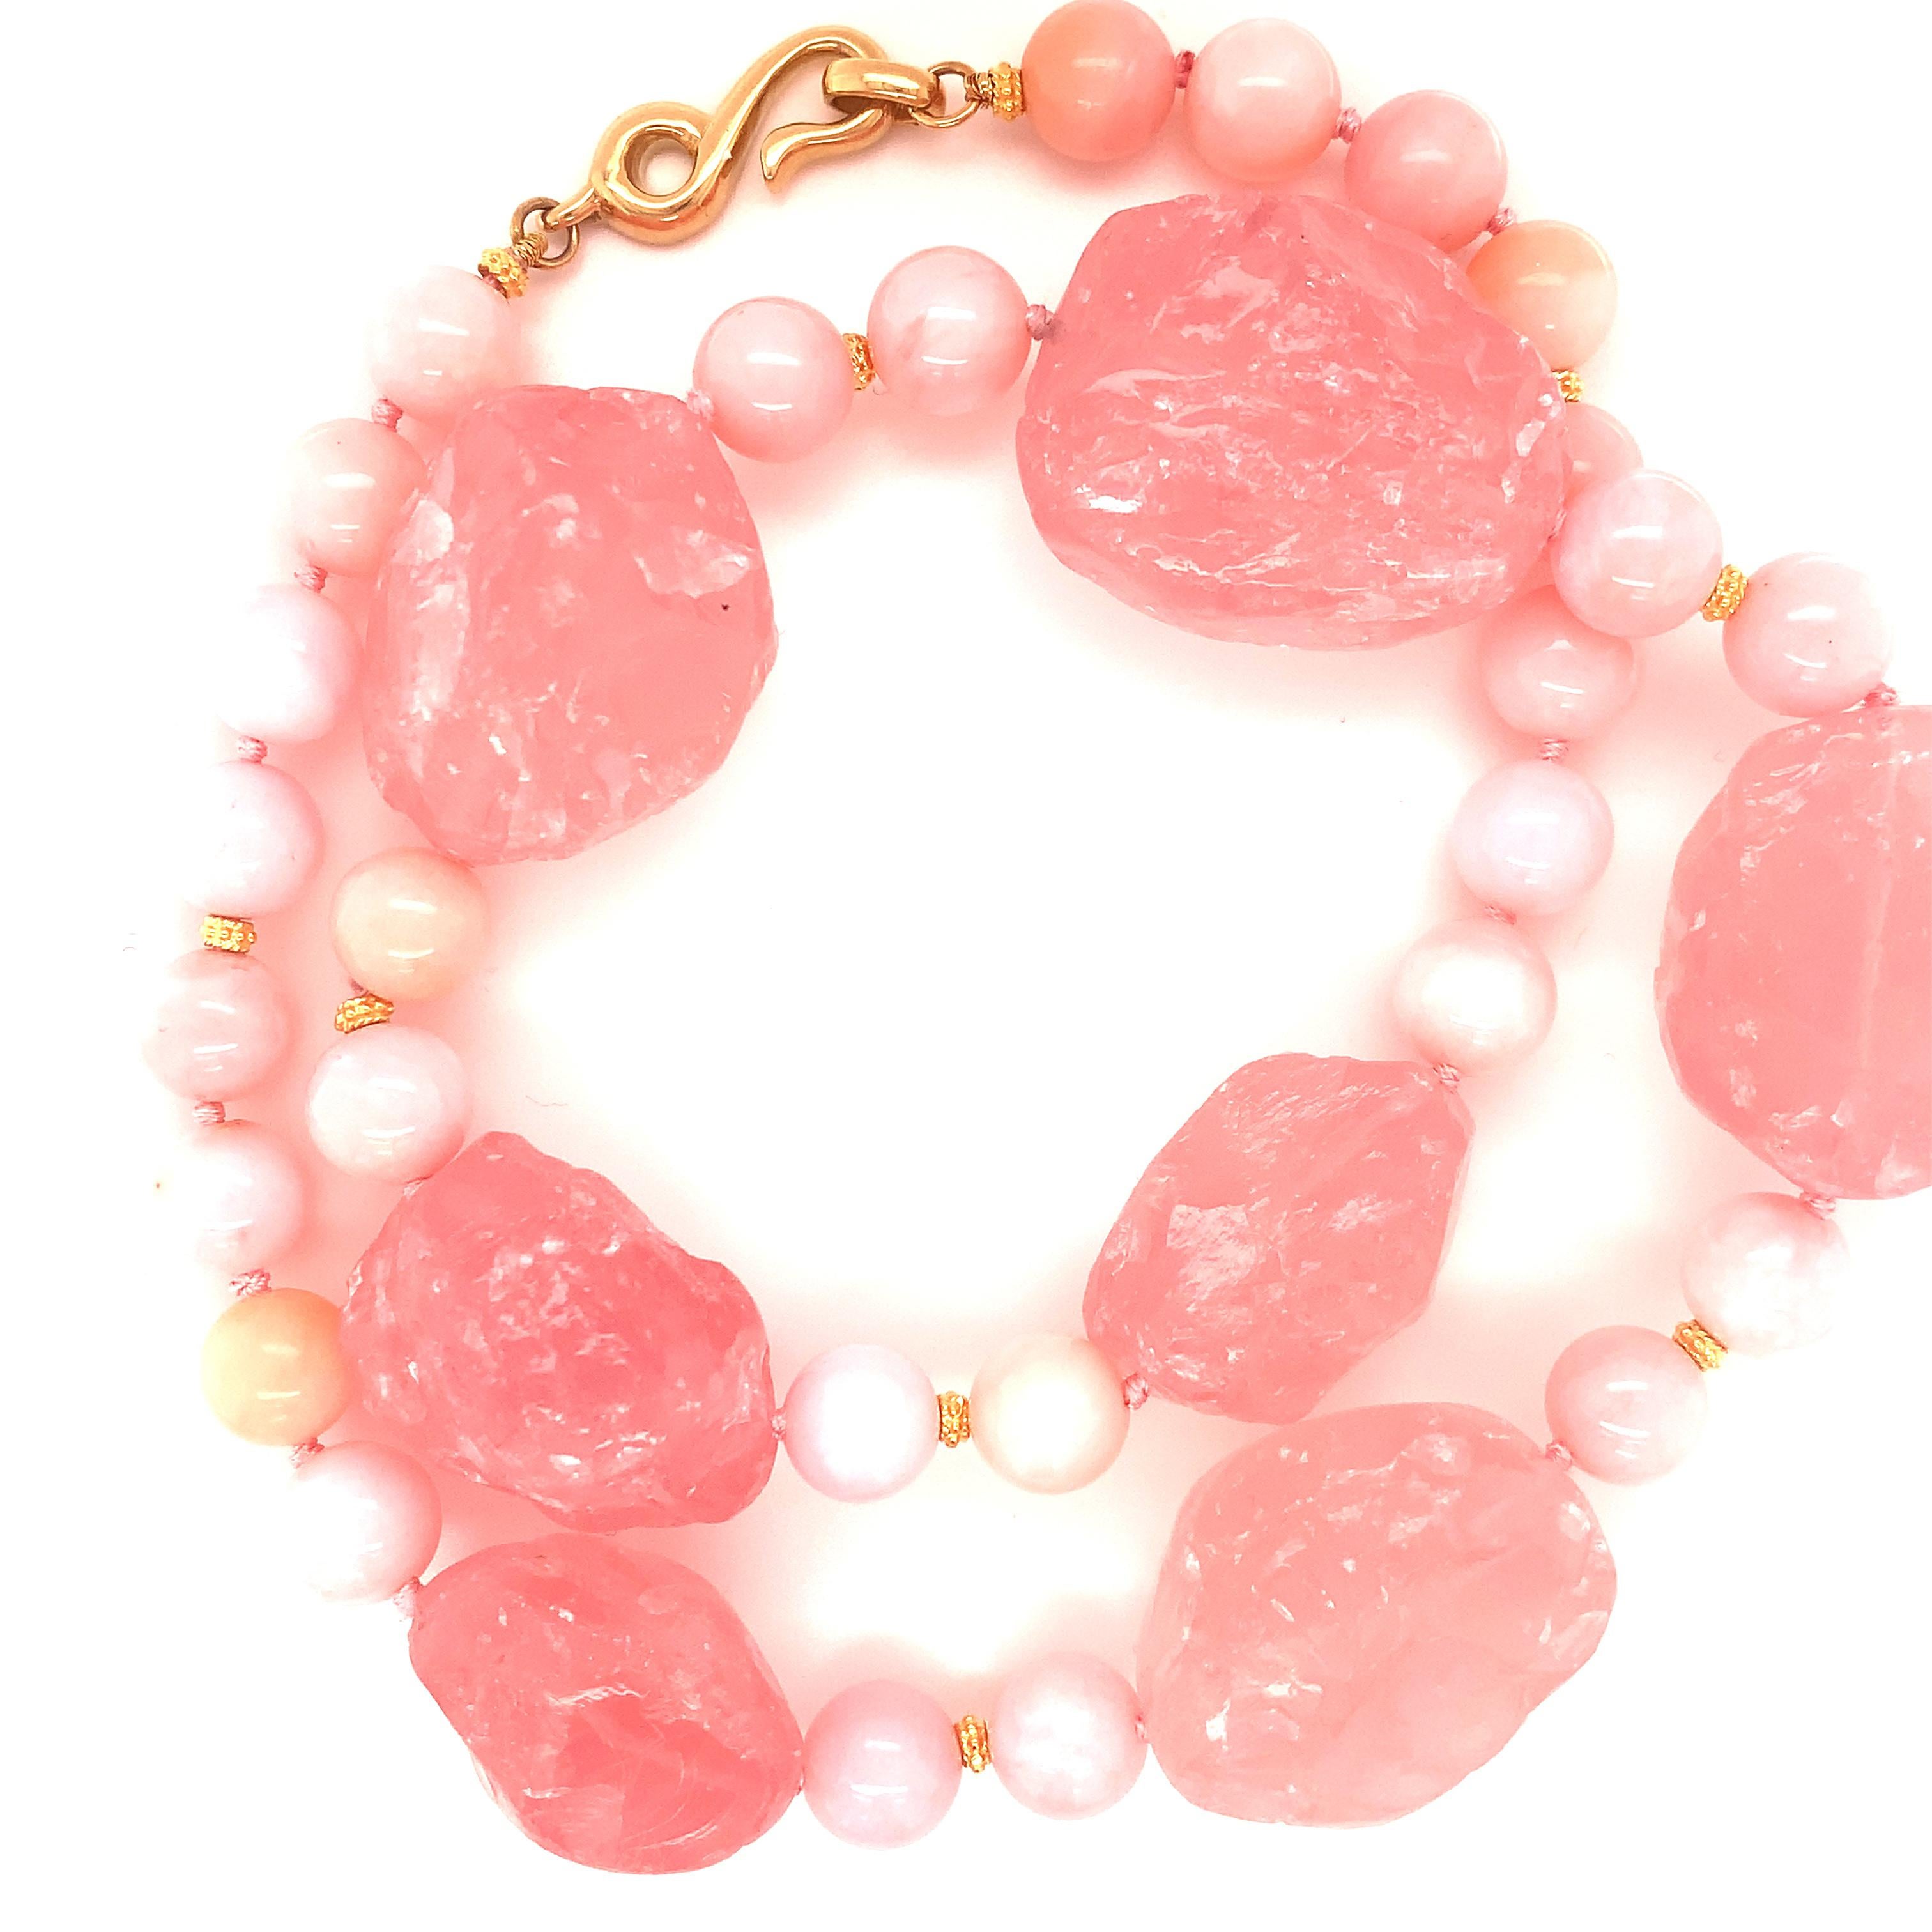 For someone who loves pink and is ready to make a statement, this rose quartz nugget and pink opal necklace is for you! 7 large, crystalline, tumbled rose quartz nuggets with gorgeous bubblegum pink color have been strung on lovely pink silk in this